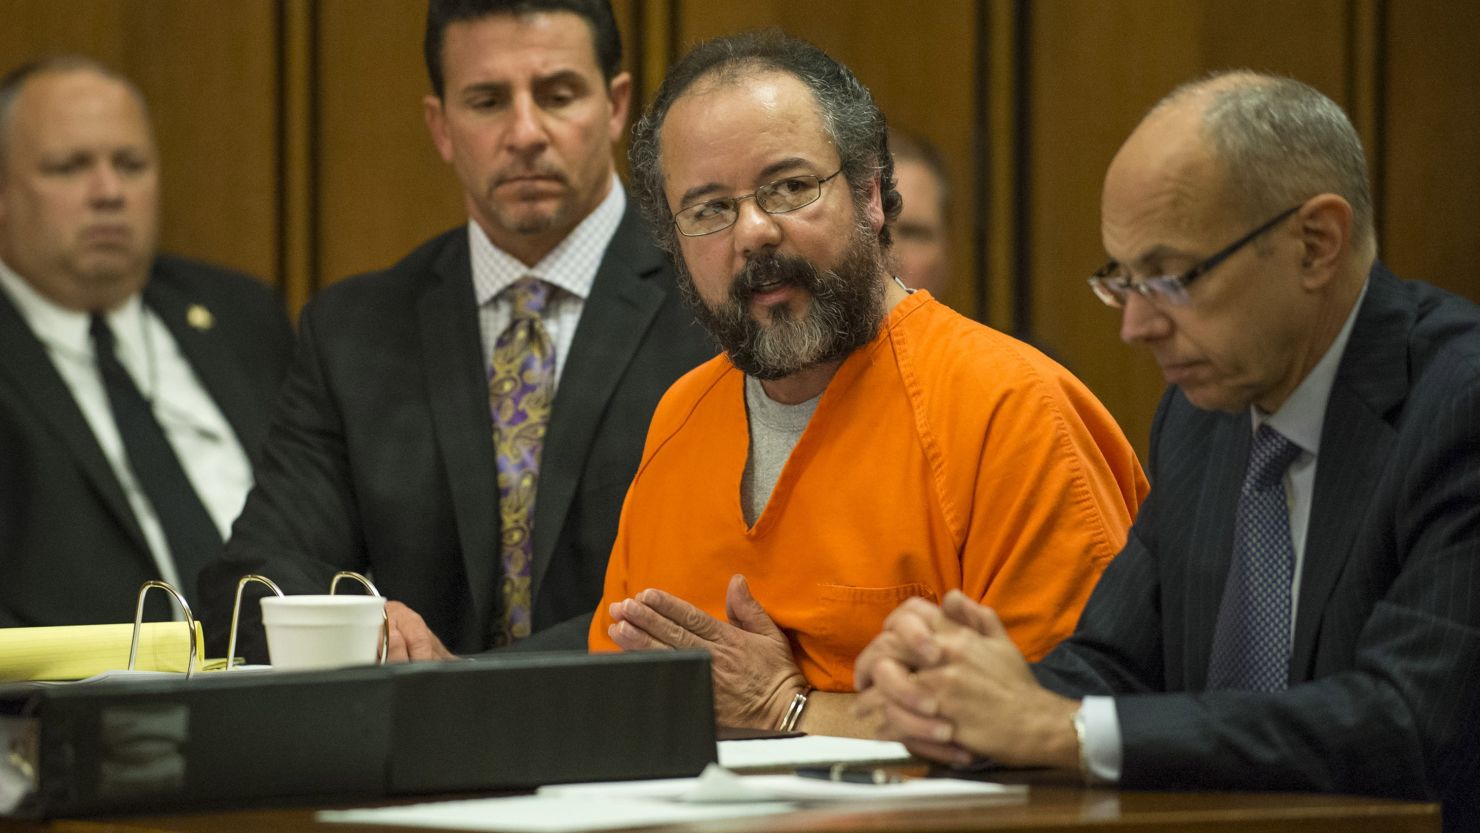 Ariel Castro pleads to Judge Michael Russo during his sentencing on August 1, 2013 in Cleveland, Ohio.